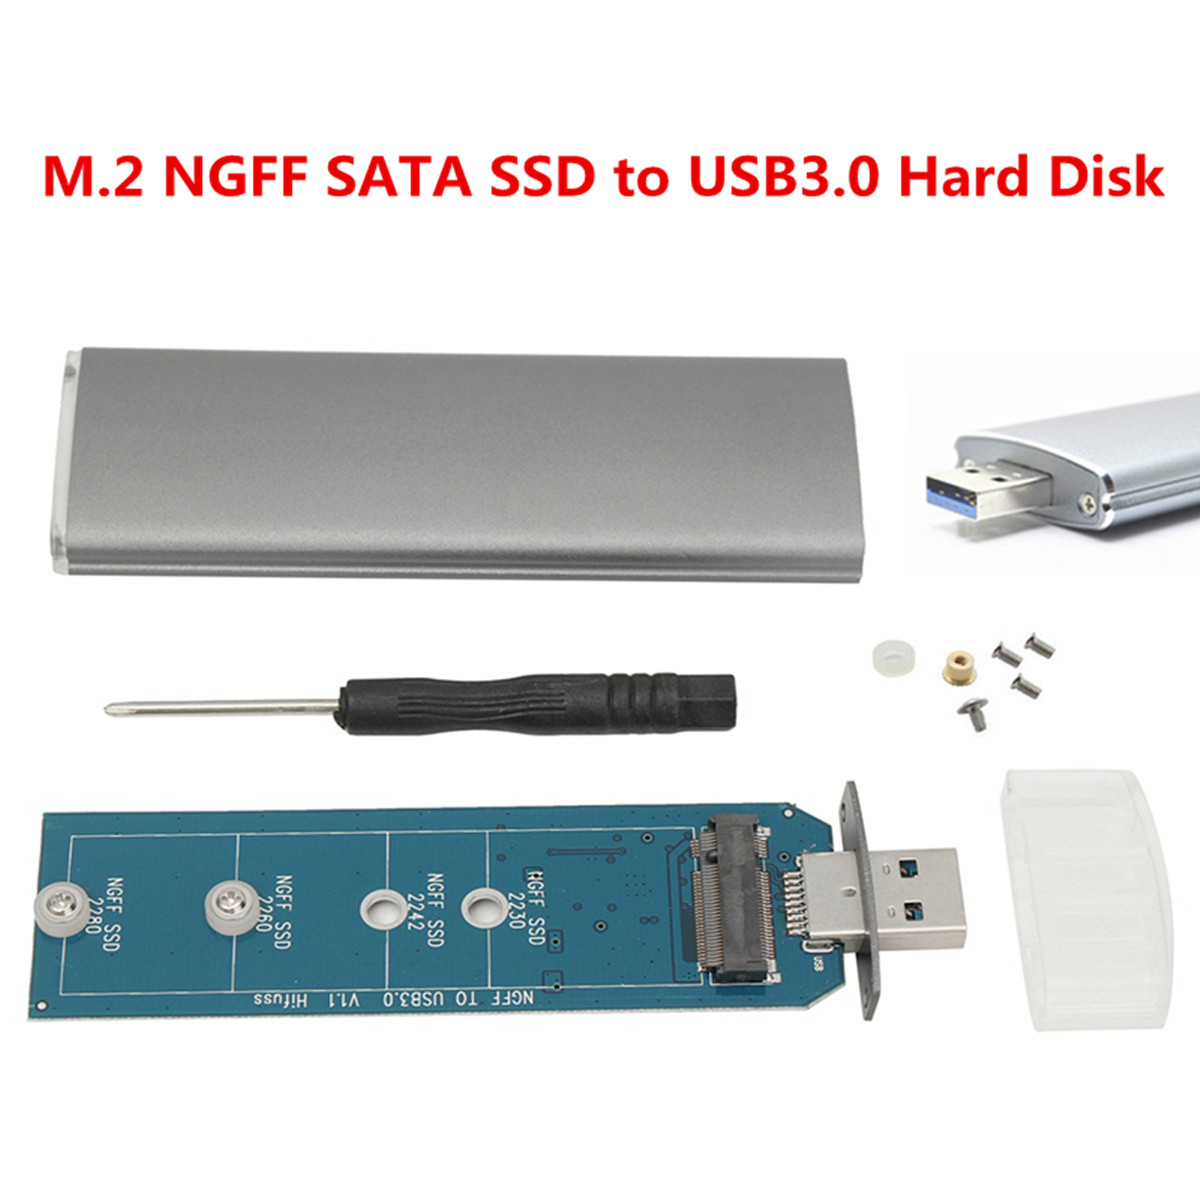 M.2 NGFF SSD SATA to USB 3.0 Converter Adapter External Enclosure Mobile SSD Case 9